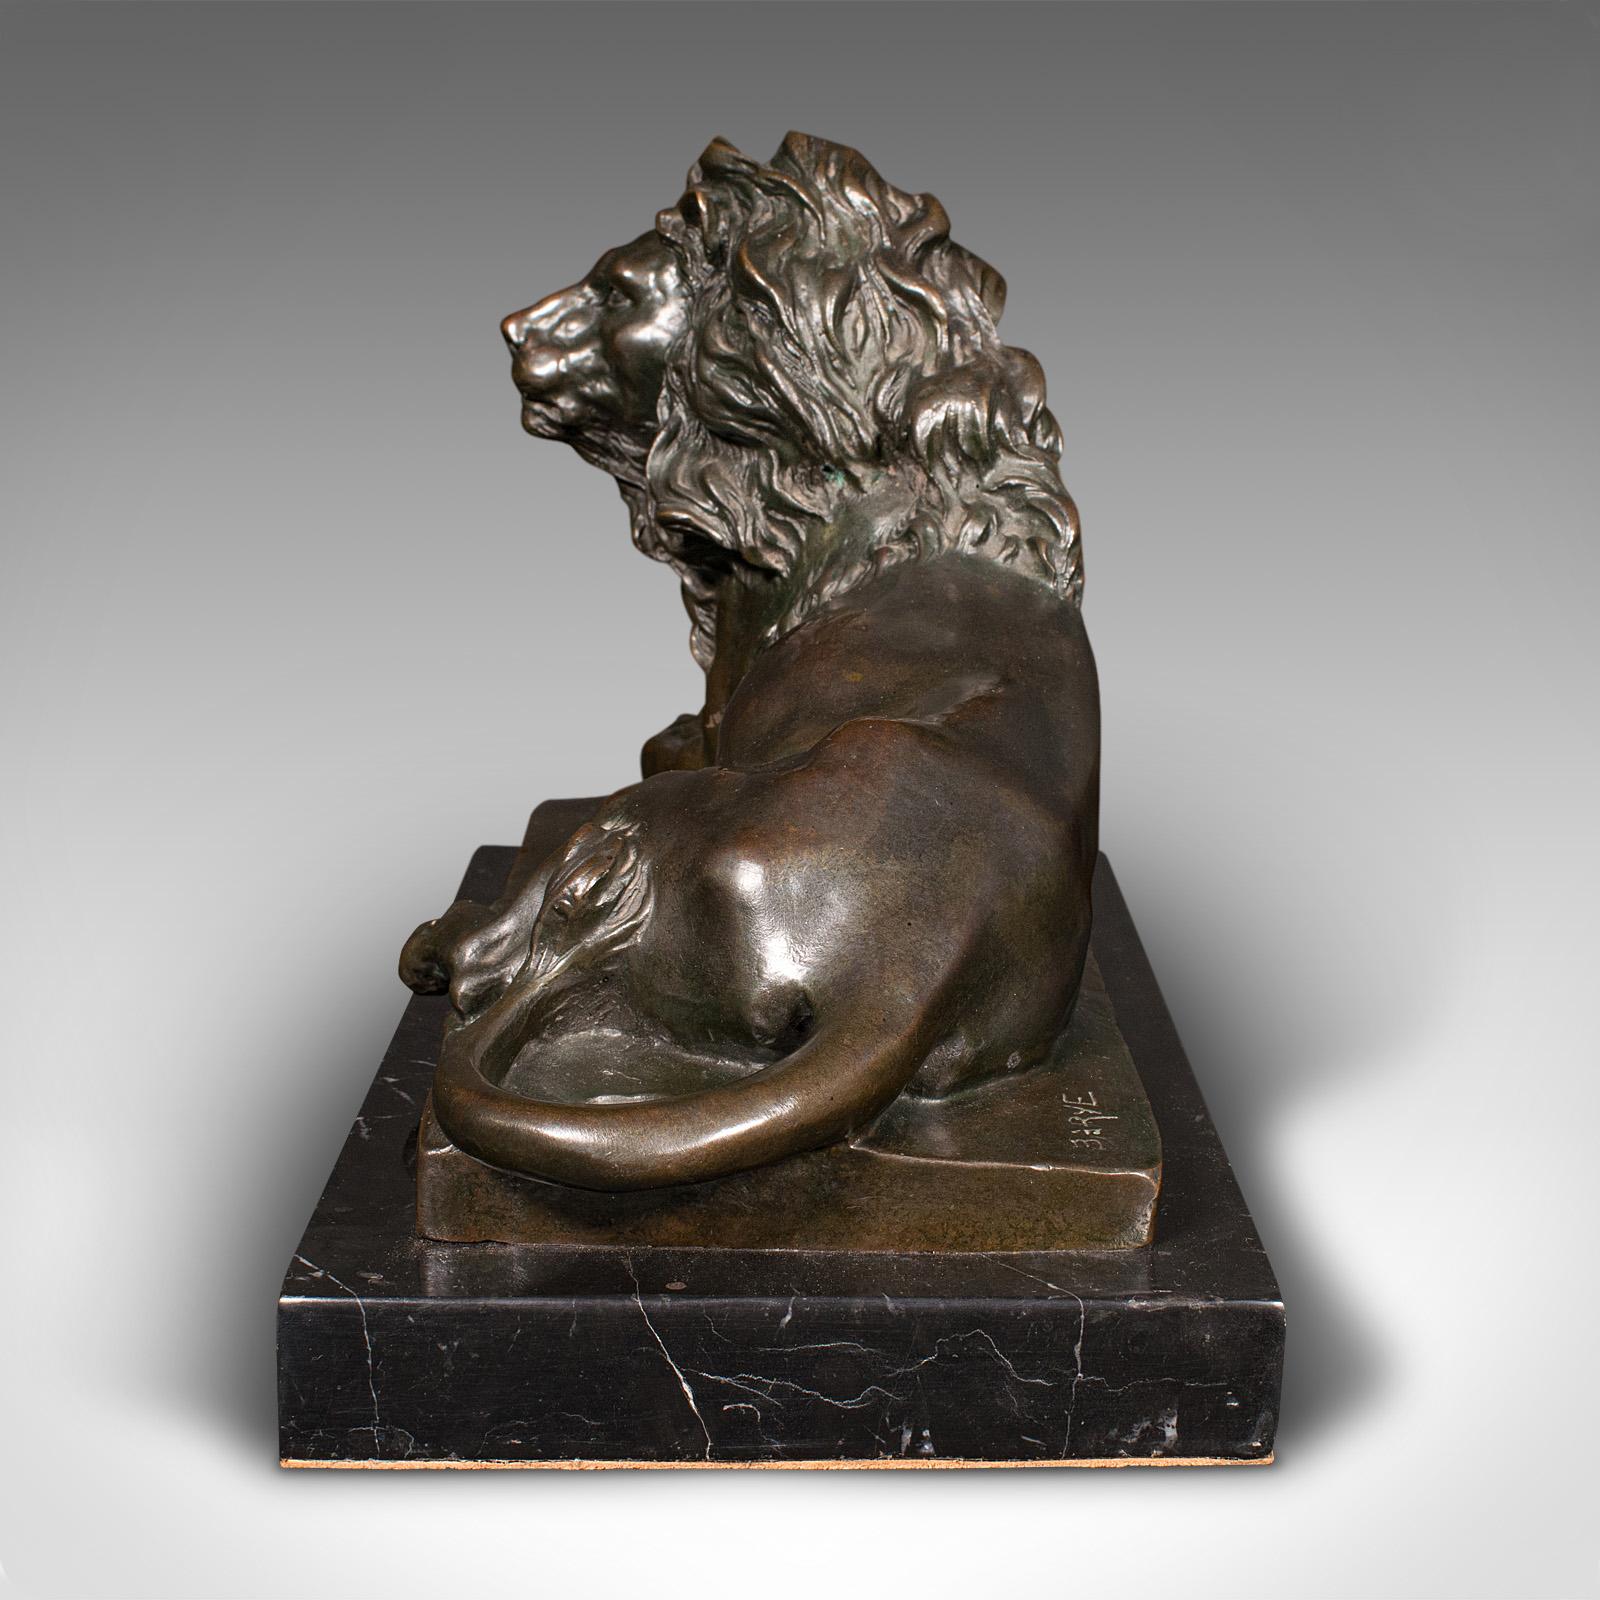 Vintage Recumbent Lion Figure, Continental, Bronze Animal Sculpture, After Barye In Good Condition For Sale In Hele, Devon, GB